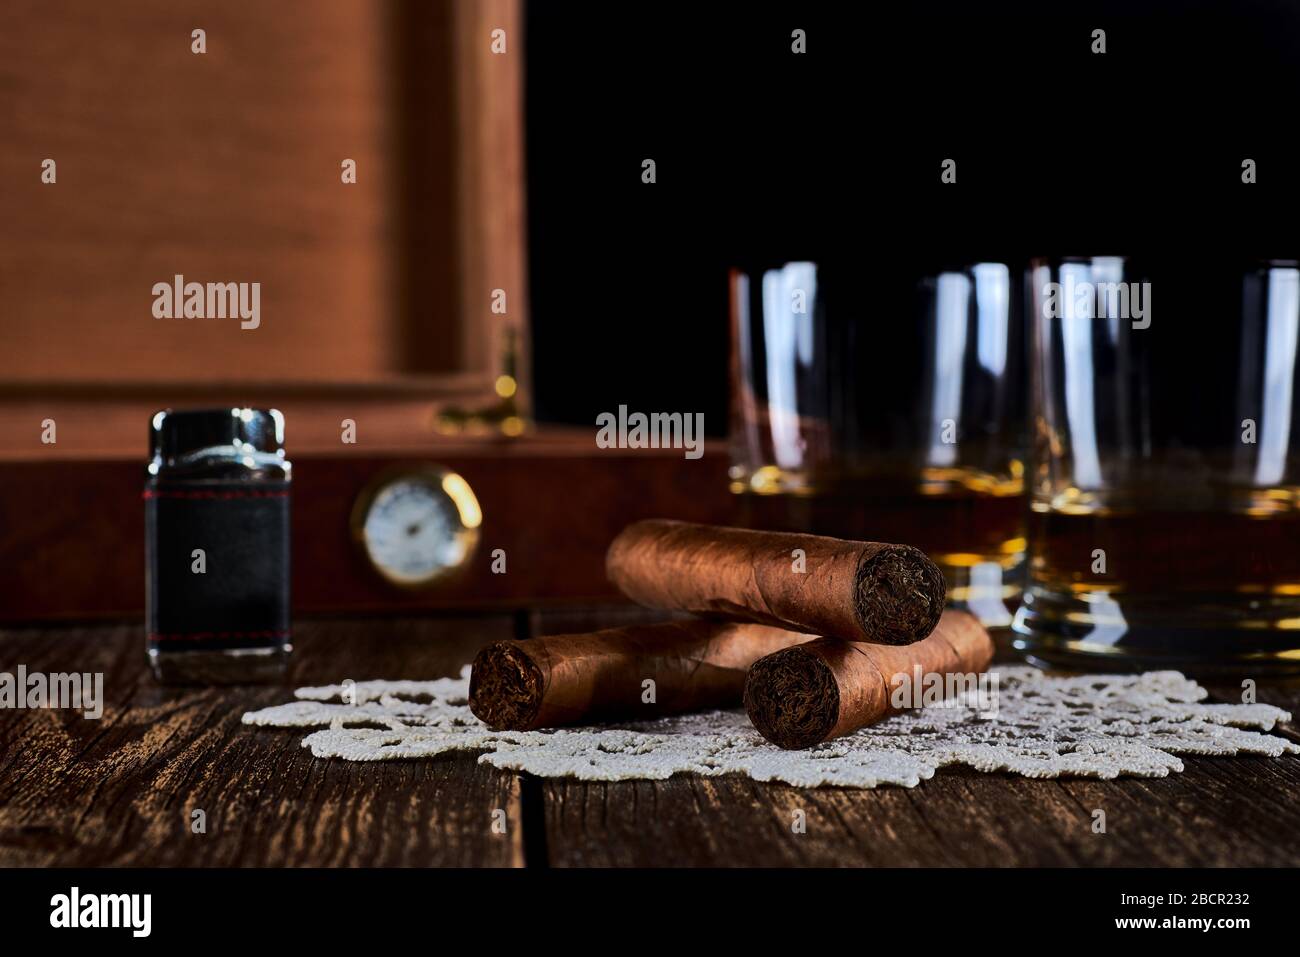 Still life with three cuban cigars, two glasses of whiskey or rum, lighter and wooden box with hygrometer. Old wooden table top and black background. Stock Photo